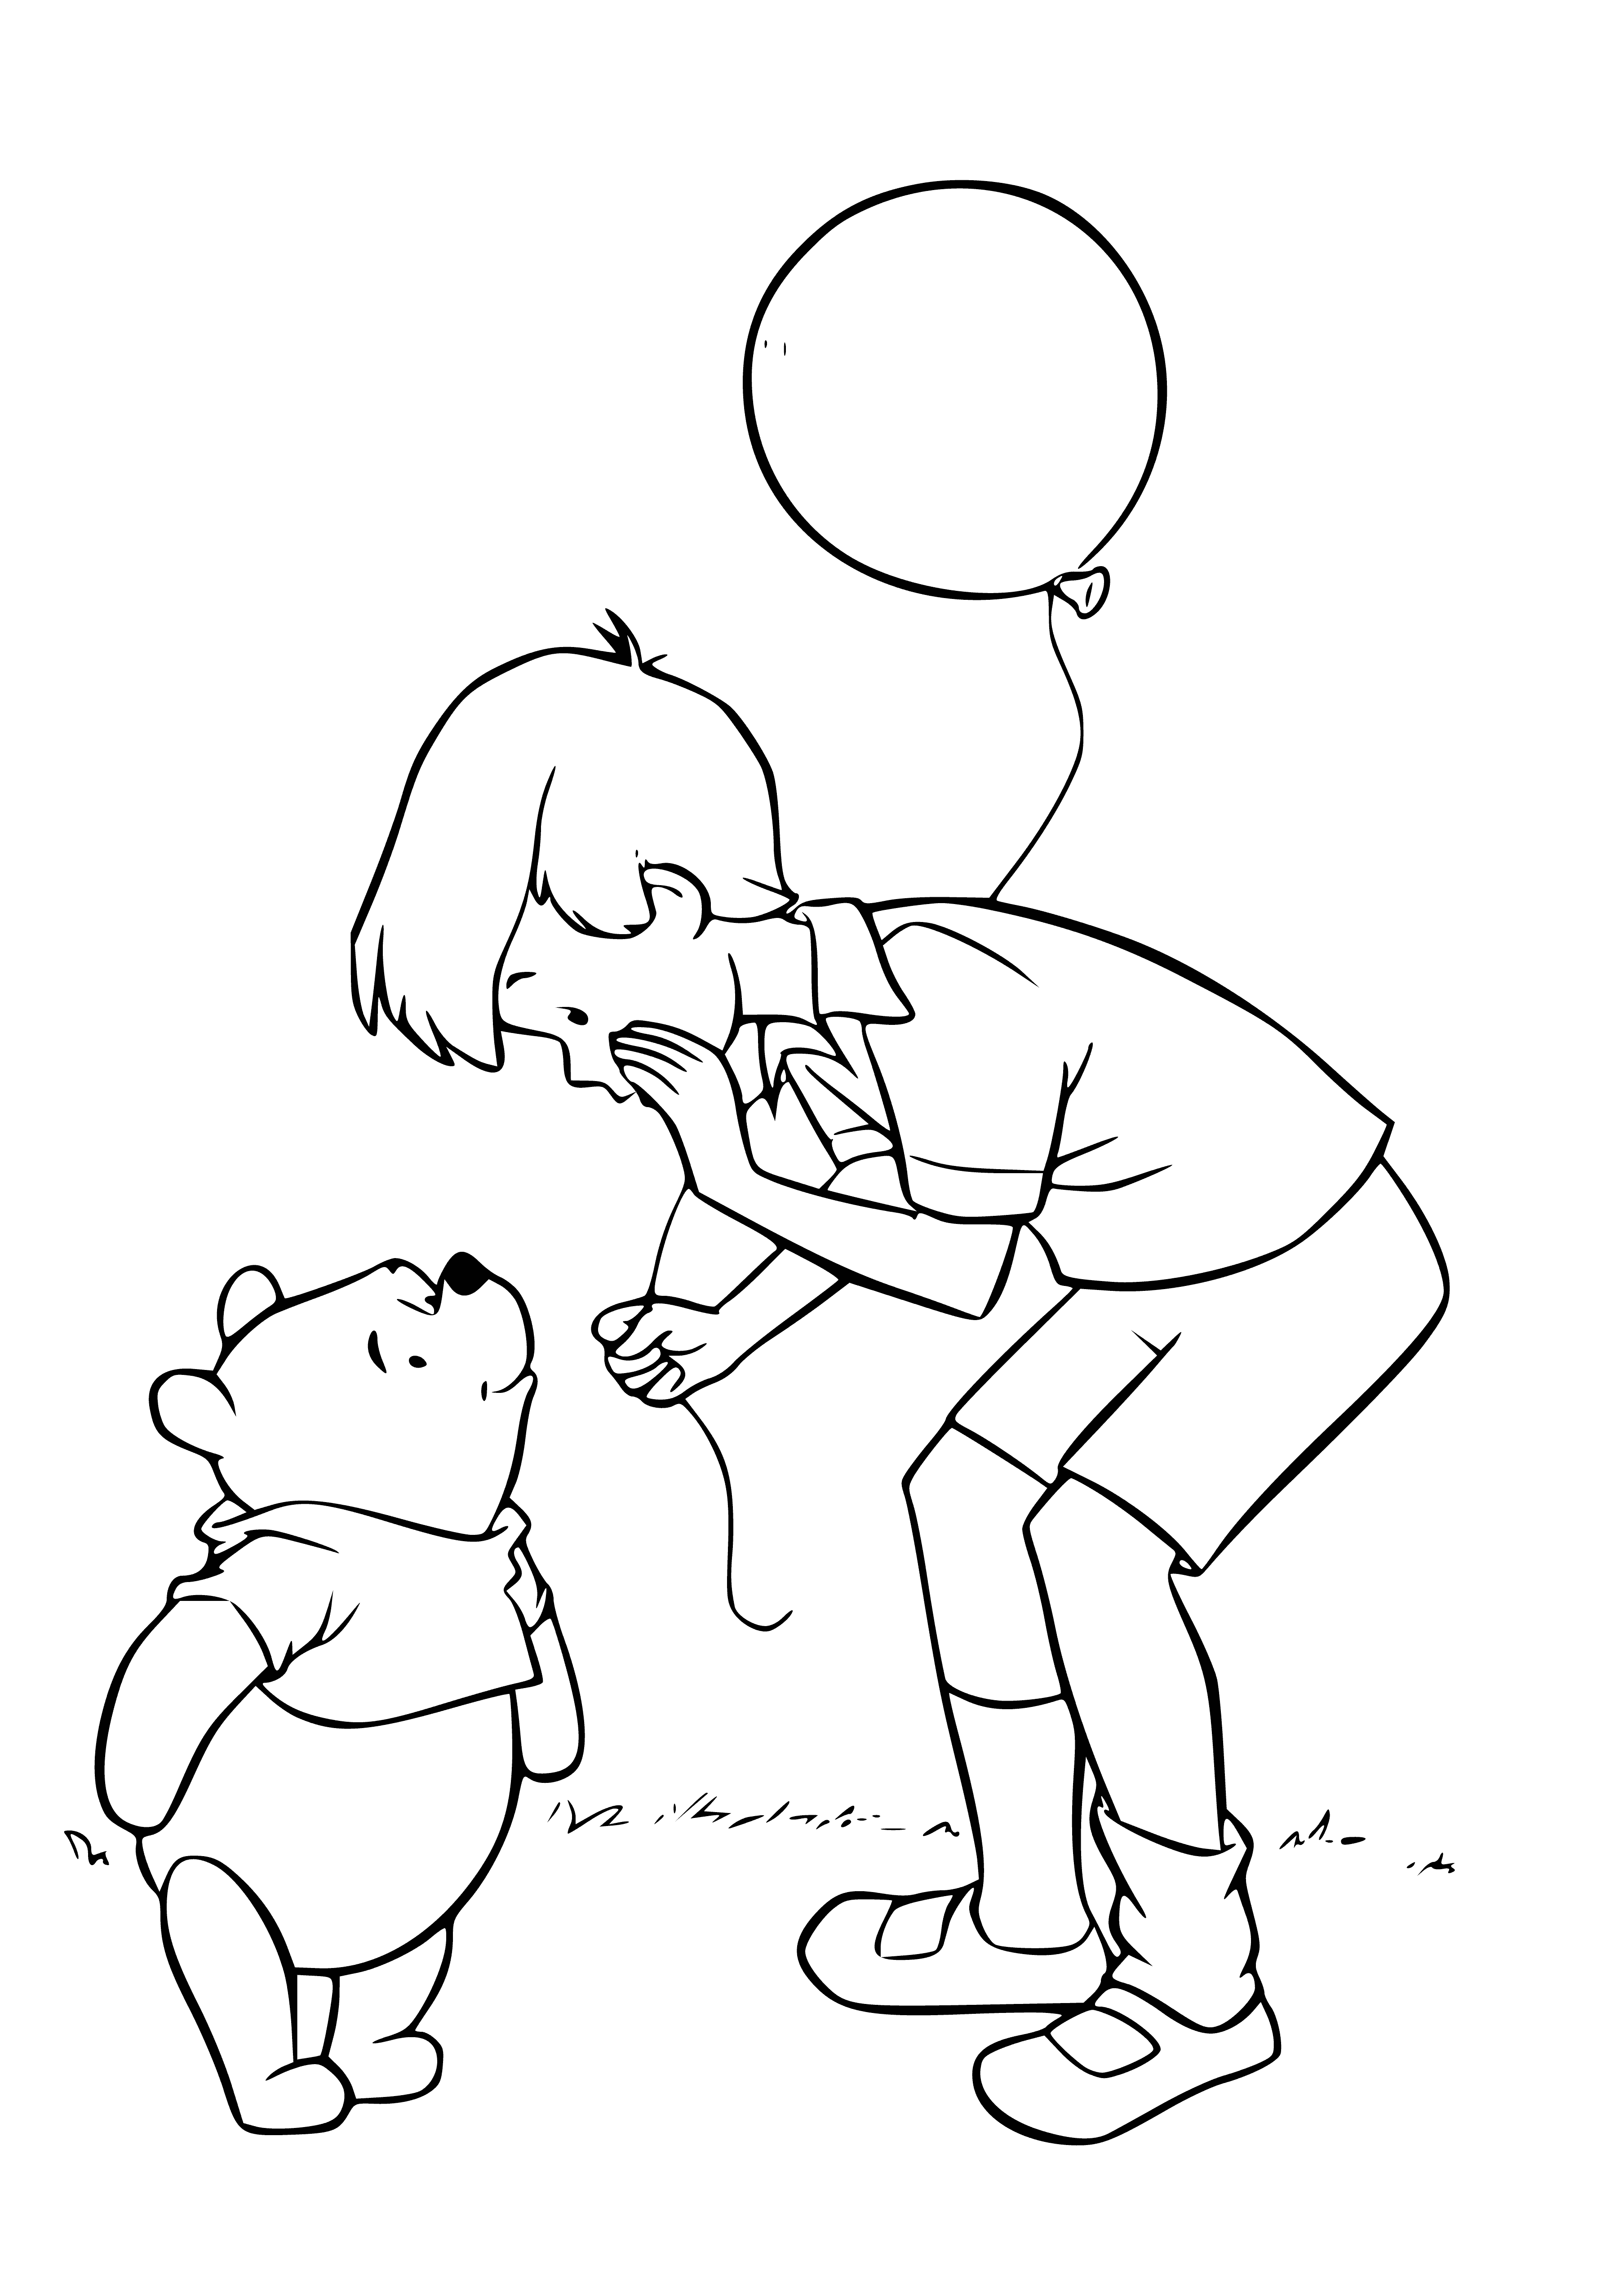 coloring page: Christopher Robin and Winnie the Pooh happily lean against each other, surrounded by a buzzing bee hive.